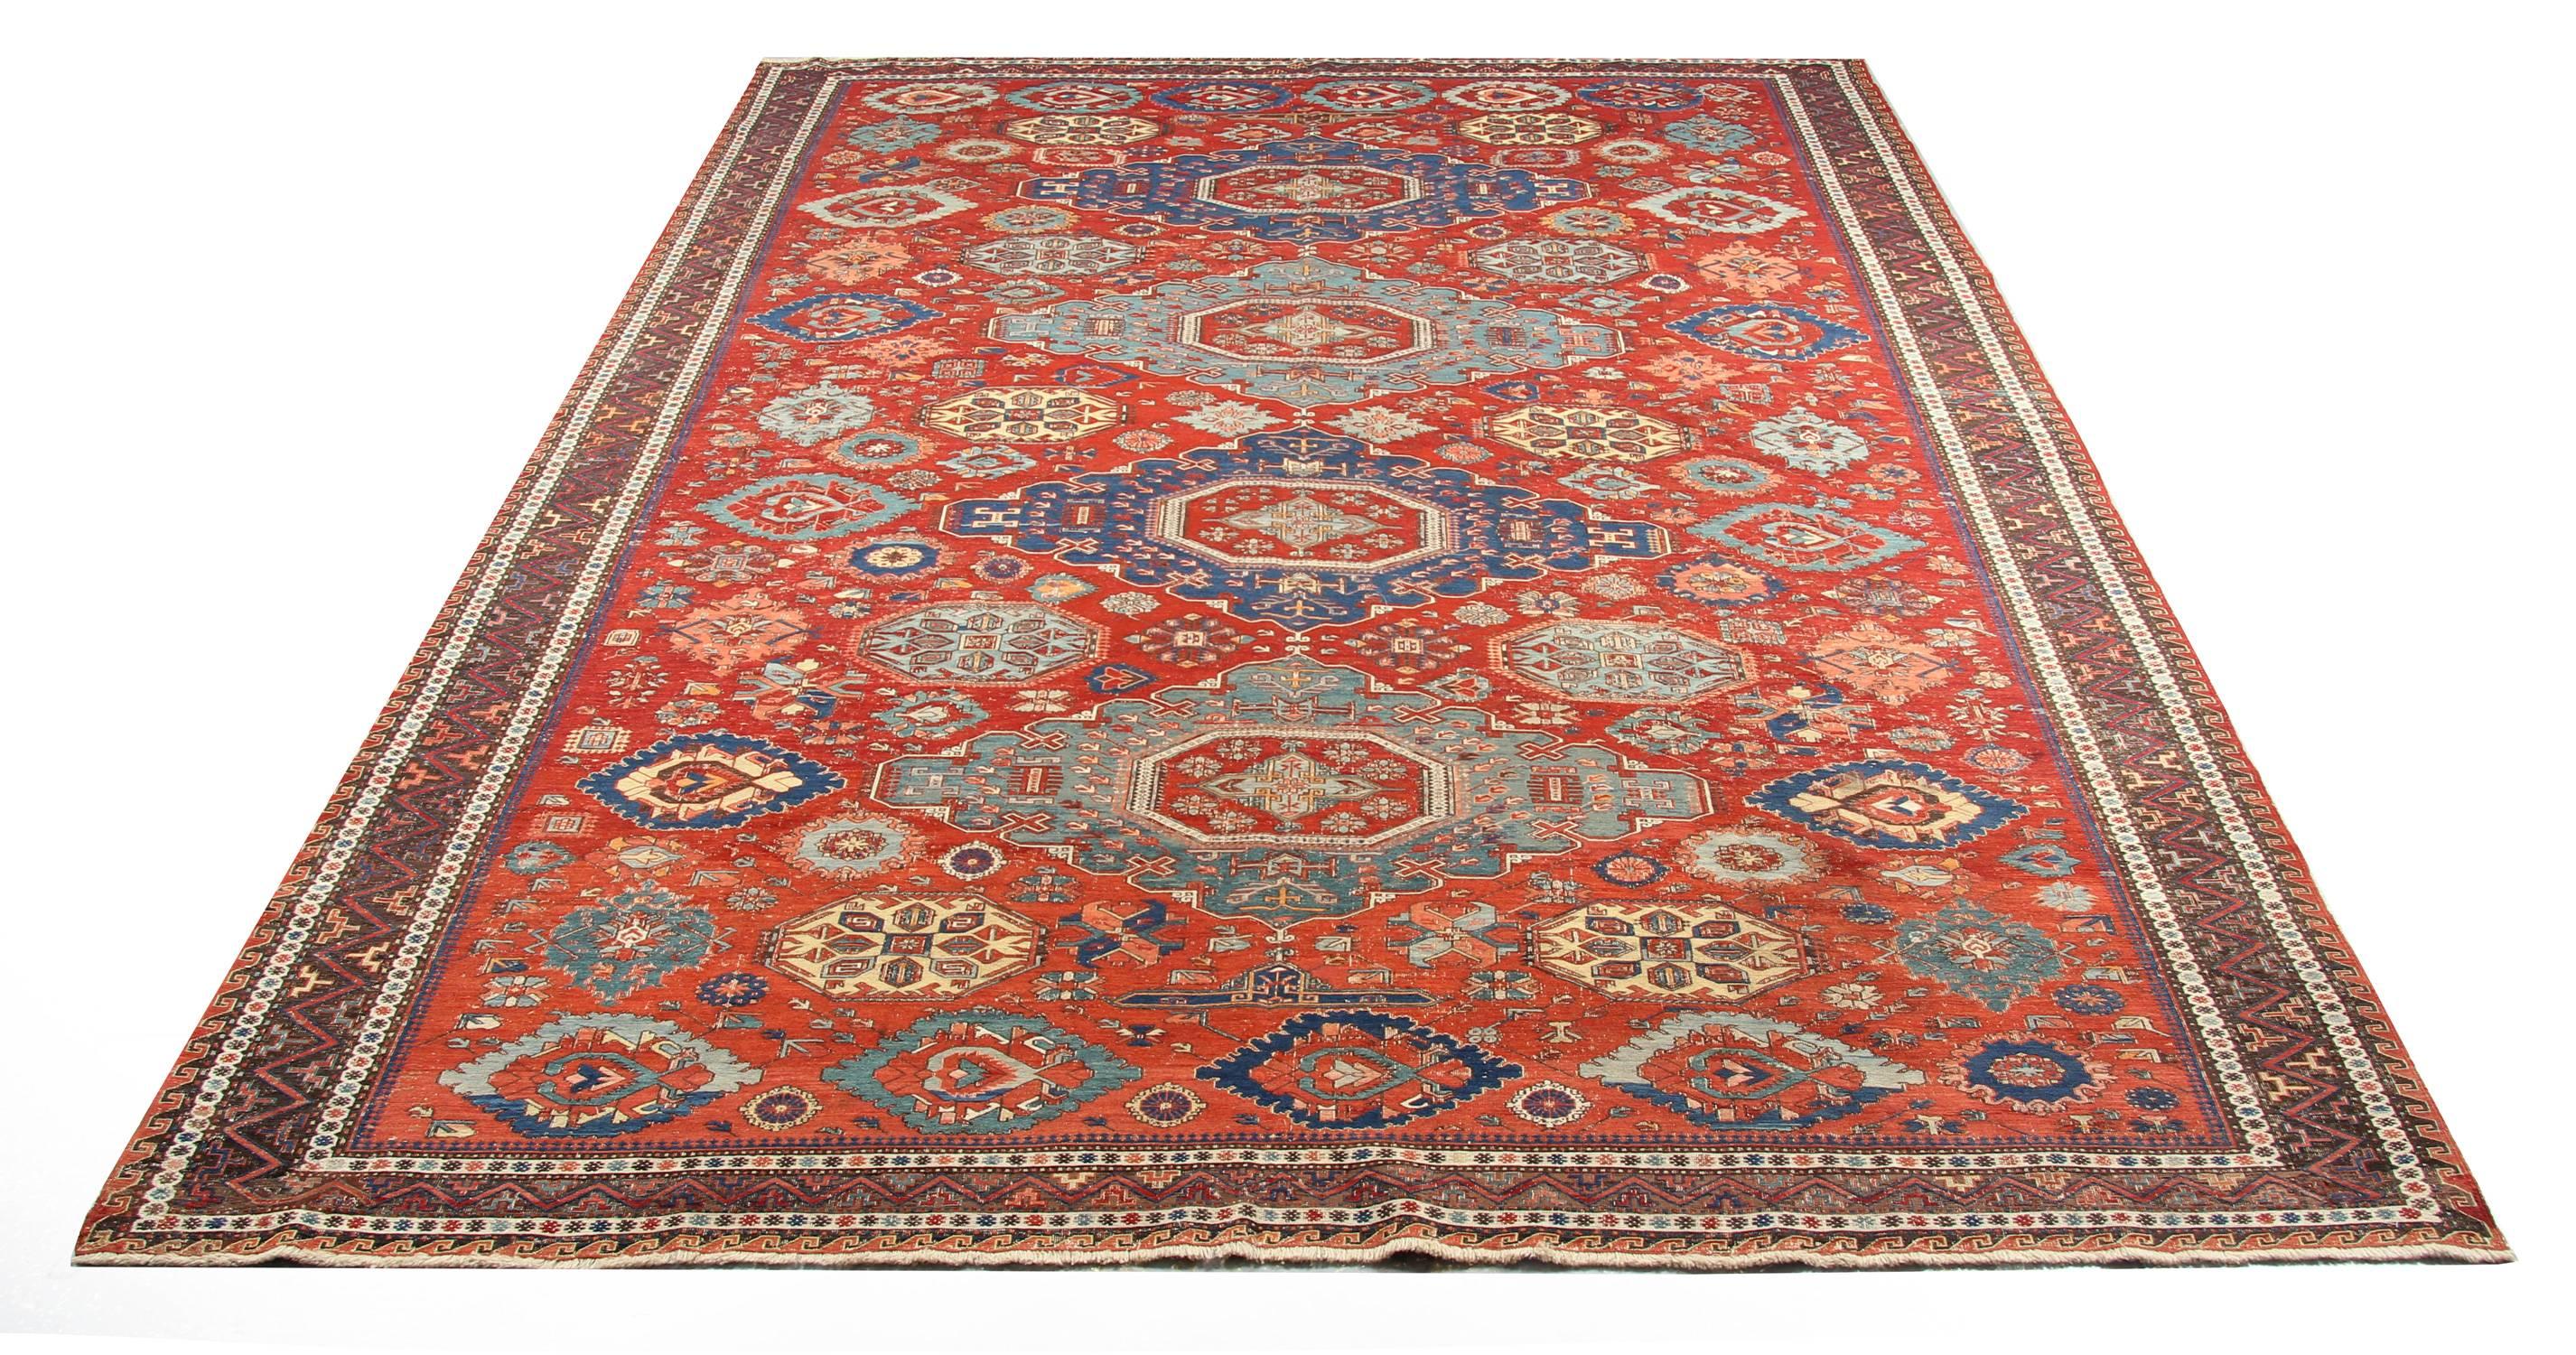 Handmade carpet Kuba Soumakh is often decorated with large abstract intended medallions arranged in a well-organized format, and this composition appears from the number of such oriental rugs to have been popular with the weavers. This is an antique